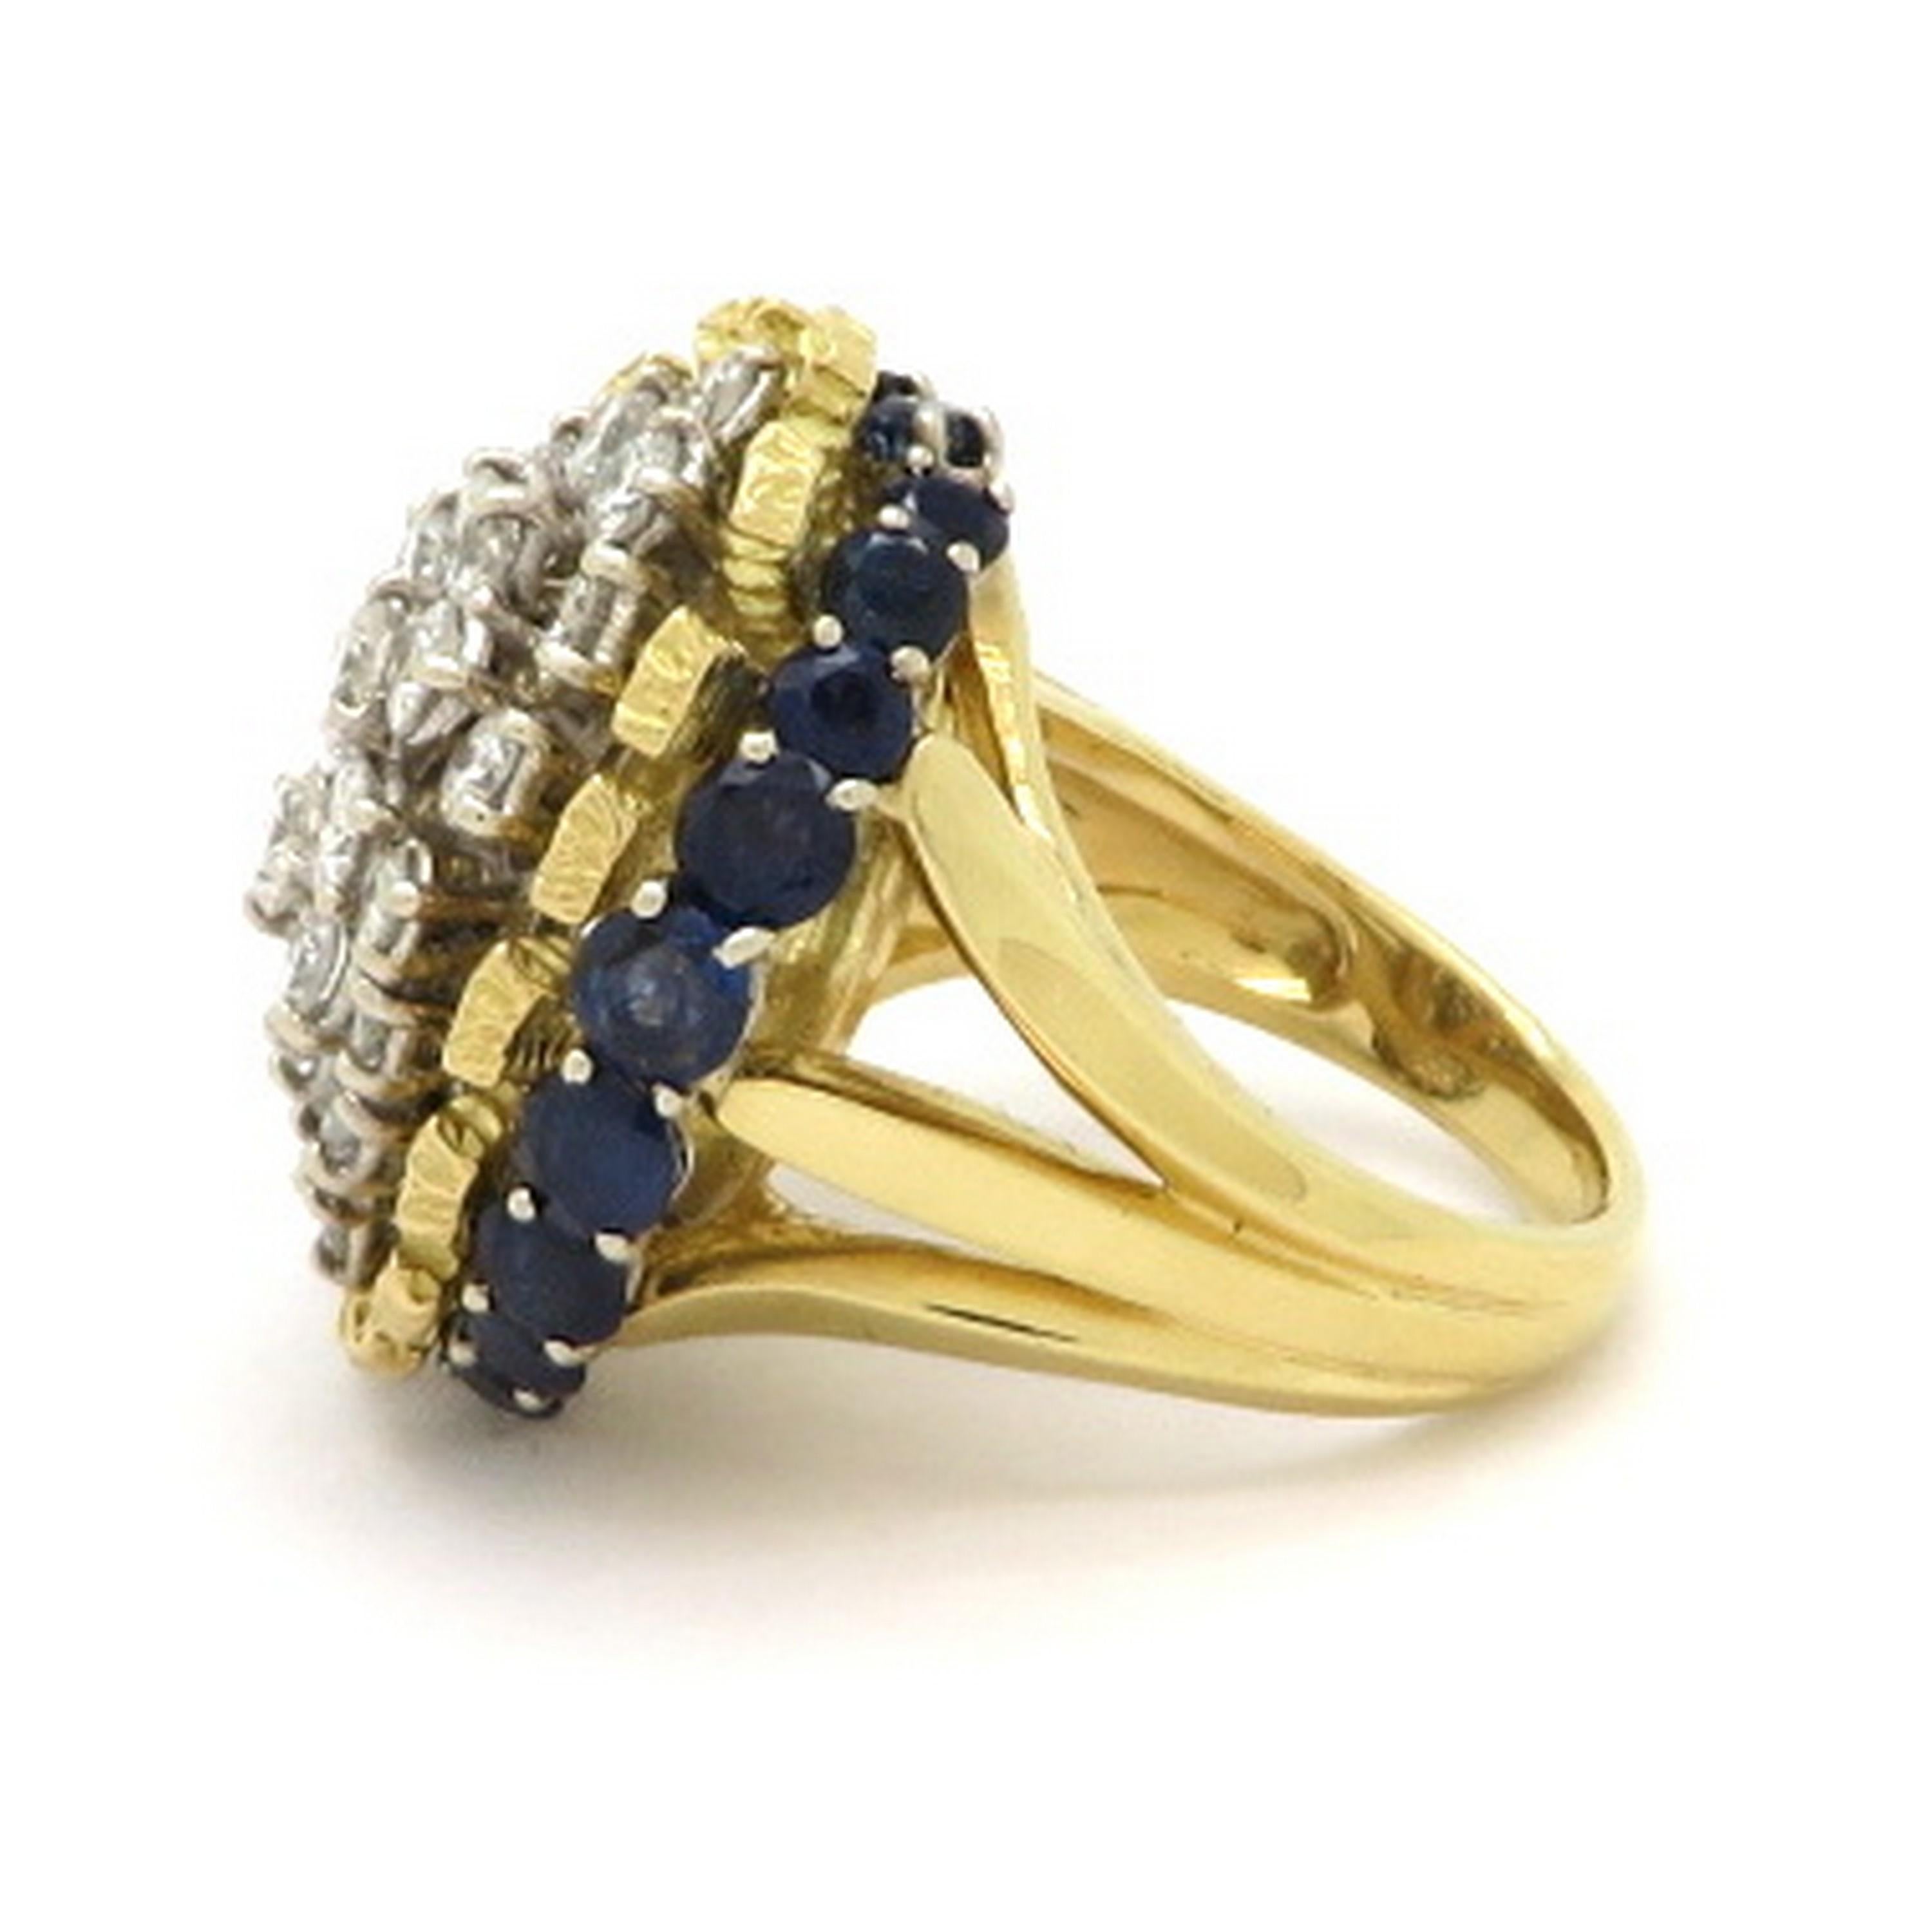 Estate platinum and 18K yellow gold 3.00 carat diamond and Sapphire cluster ring. Showcasing 25 round brilliant cut diamonds, prong set, weighing a combined total of approximately 3.00 carats. Interspersed with 20 round brilliant cut prong set fine